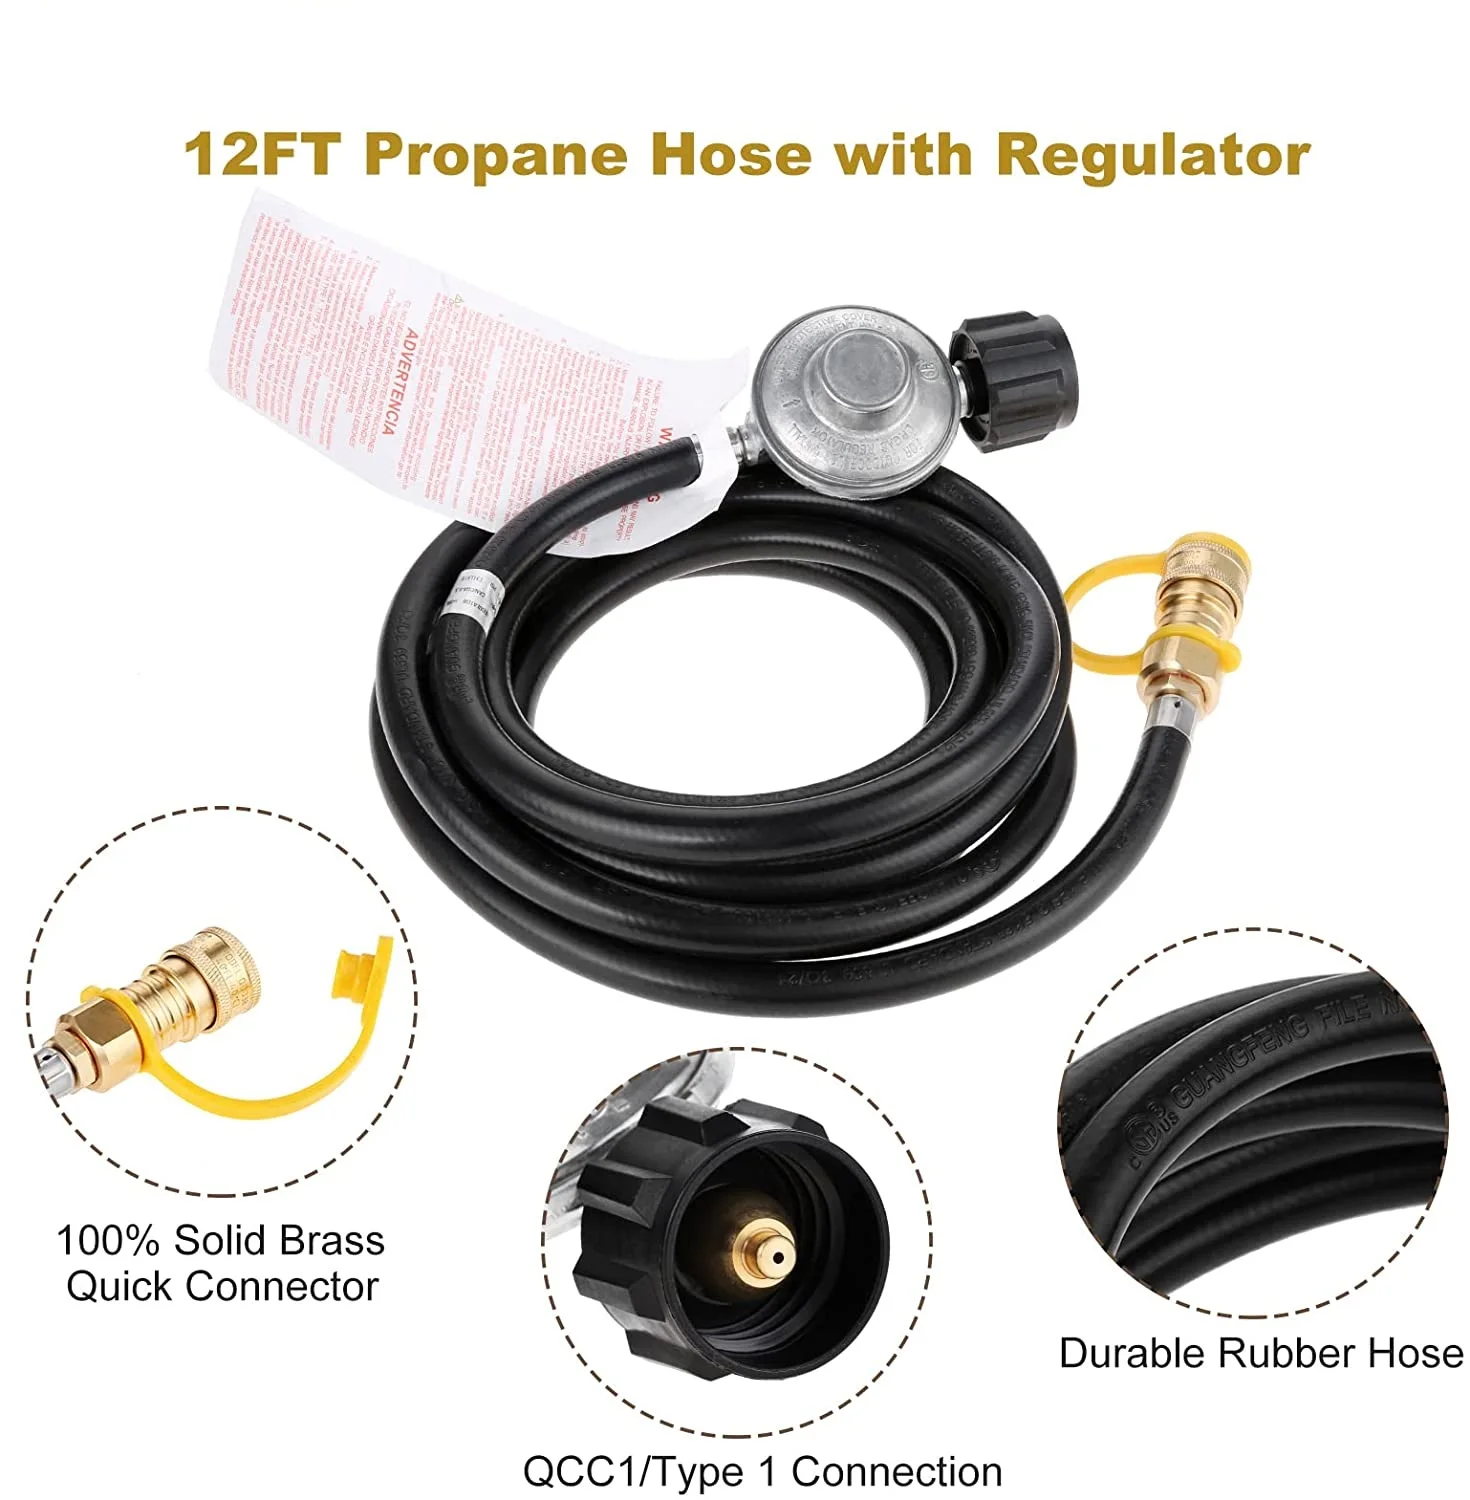 

1set 12FT Propane Hose + Regulator 3/8 Quick Connect Disconnect fit Mr Heater Grill Buddy Heater Type 1 Connection Home/Outdoor